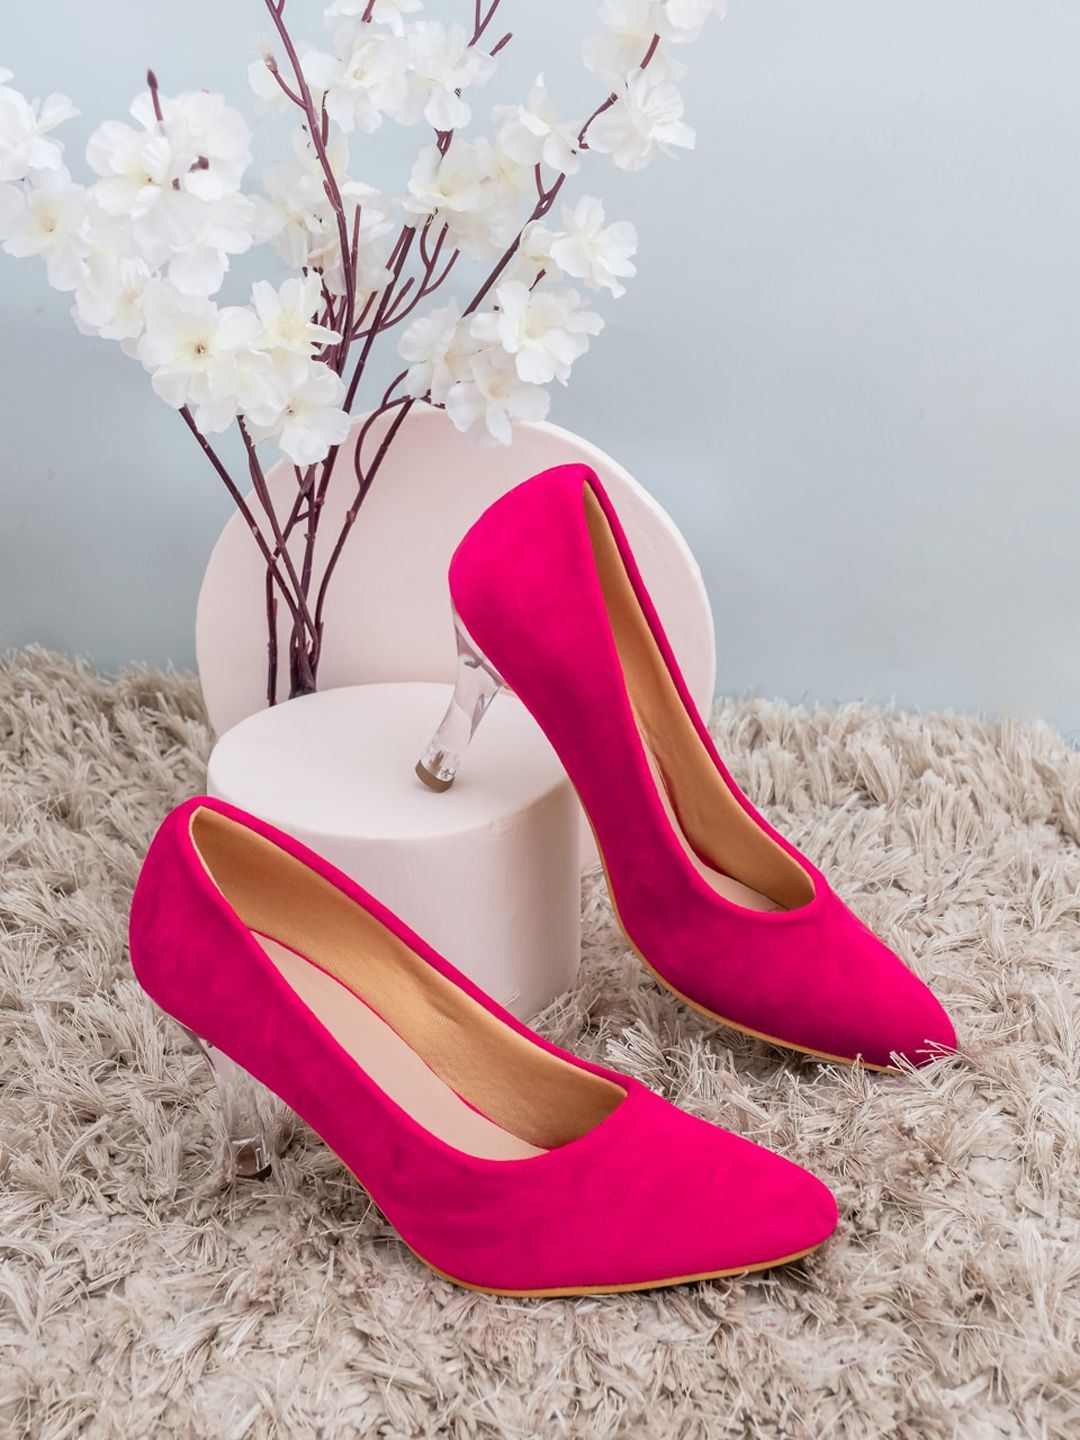 Shezone Pink Suede Pumps Price in India